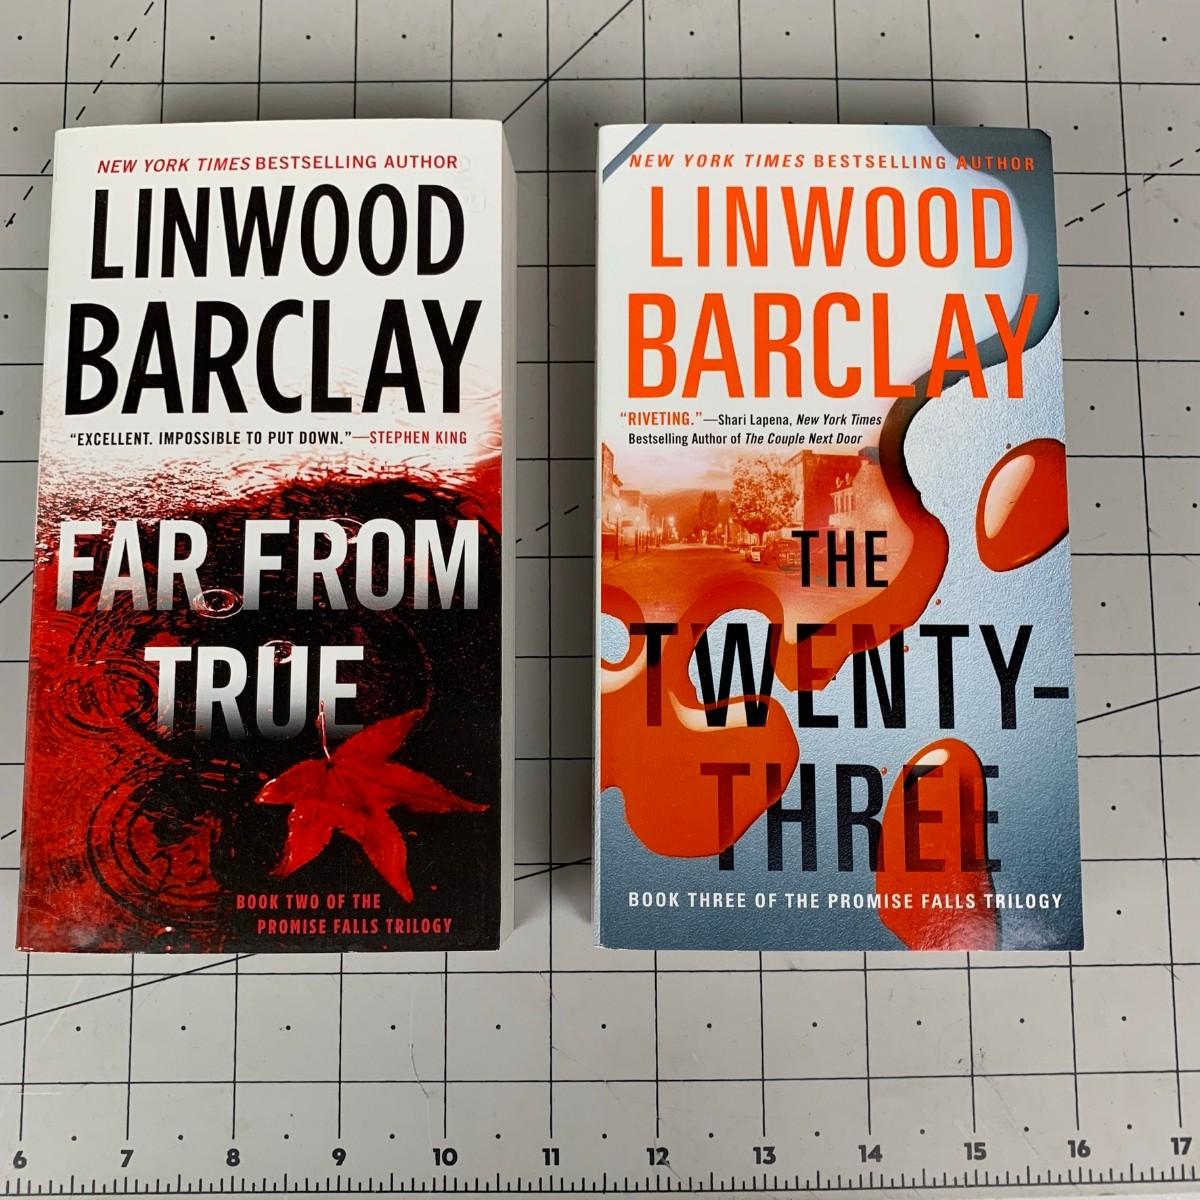 51 Linwood Barclay Books Far From True & The 23